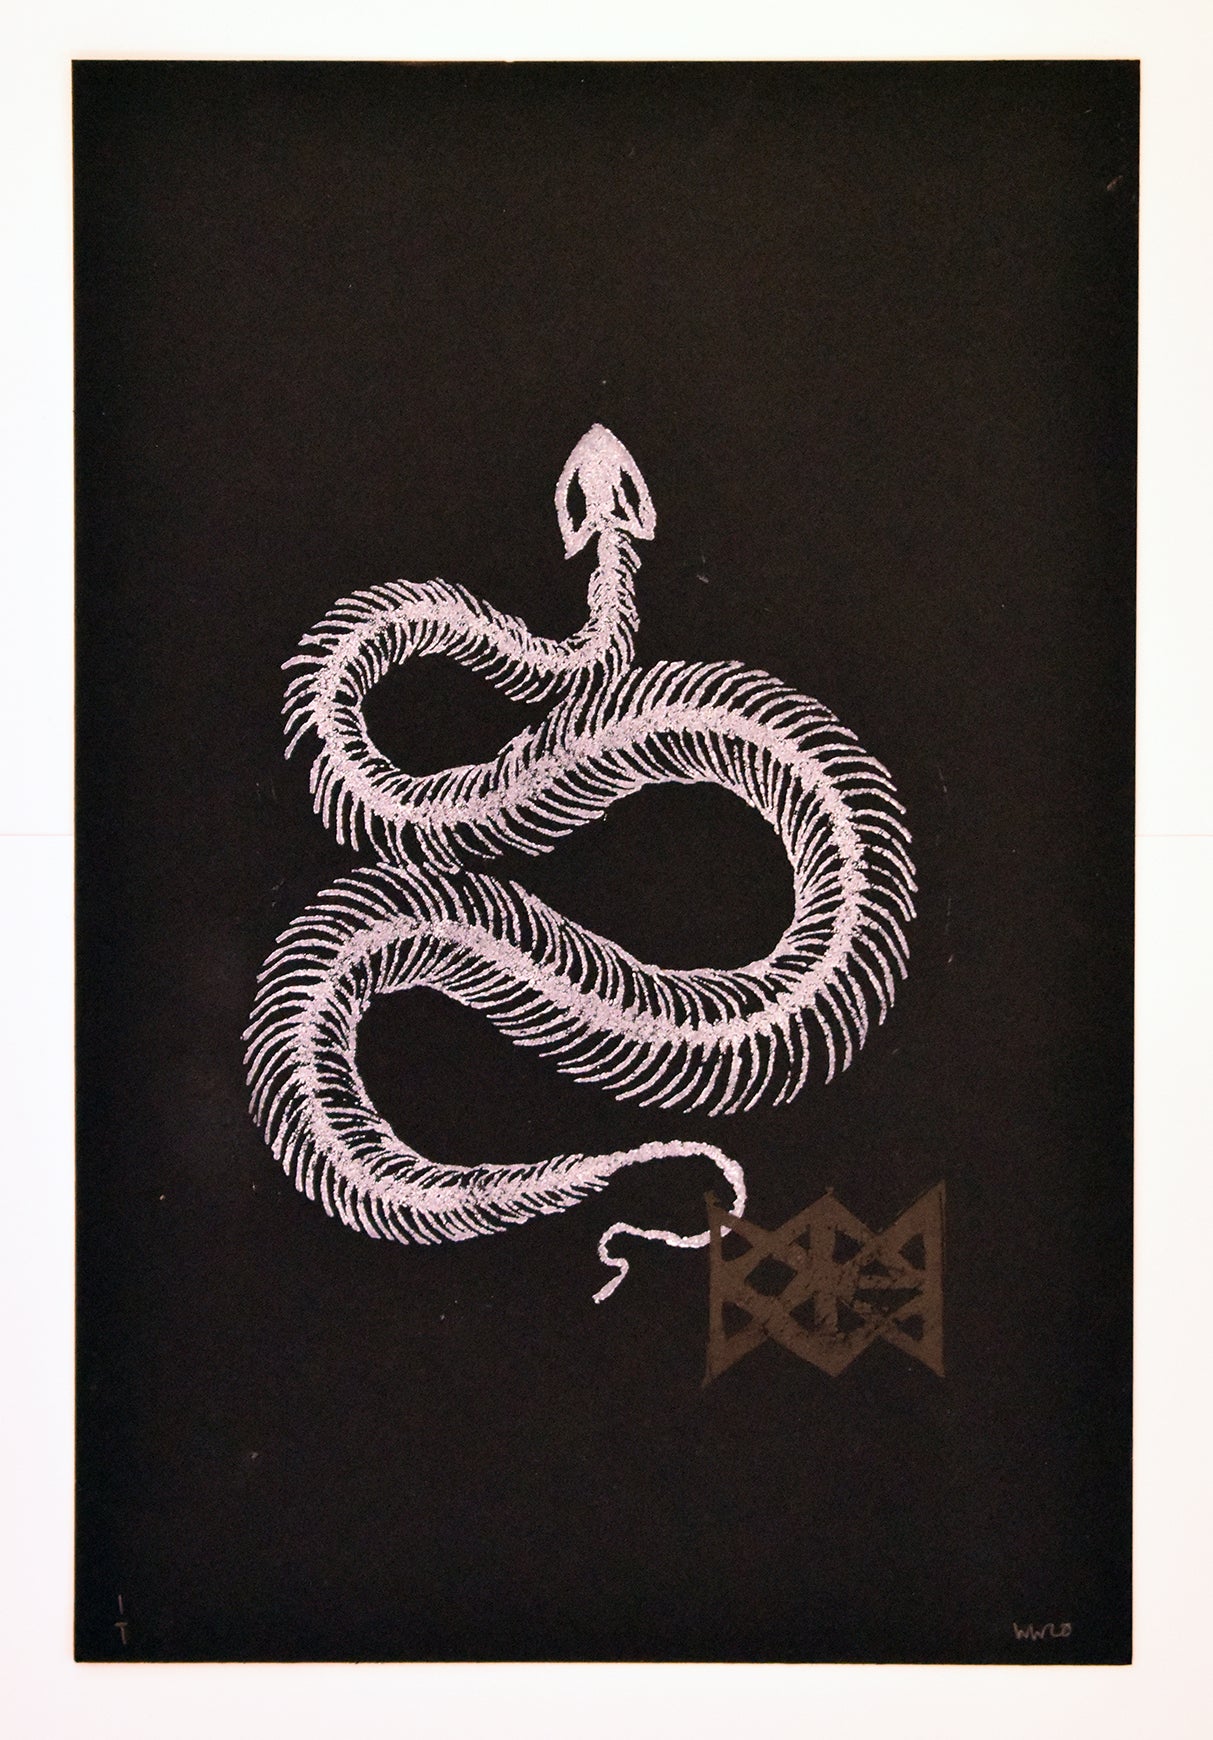 Will Wright - WYRM - Large scale white and black with runecharm